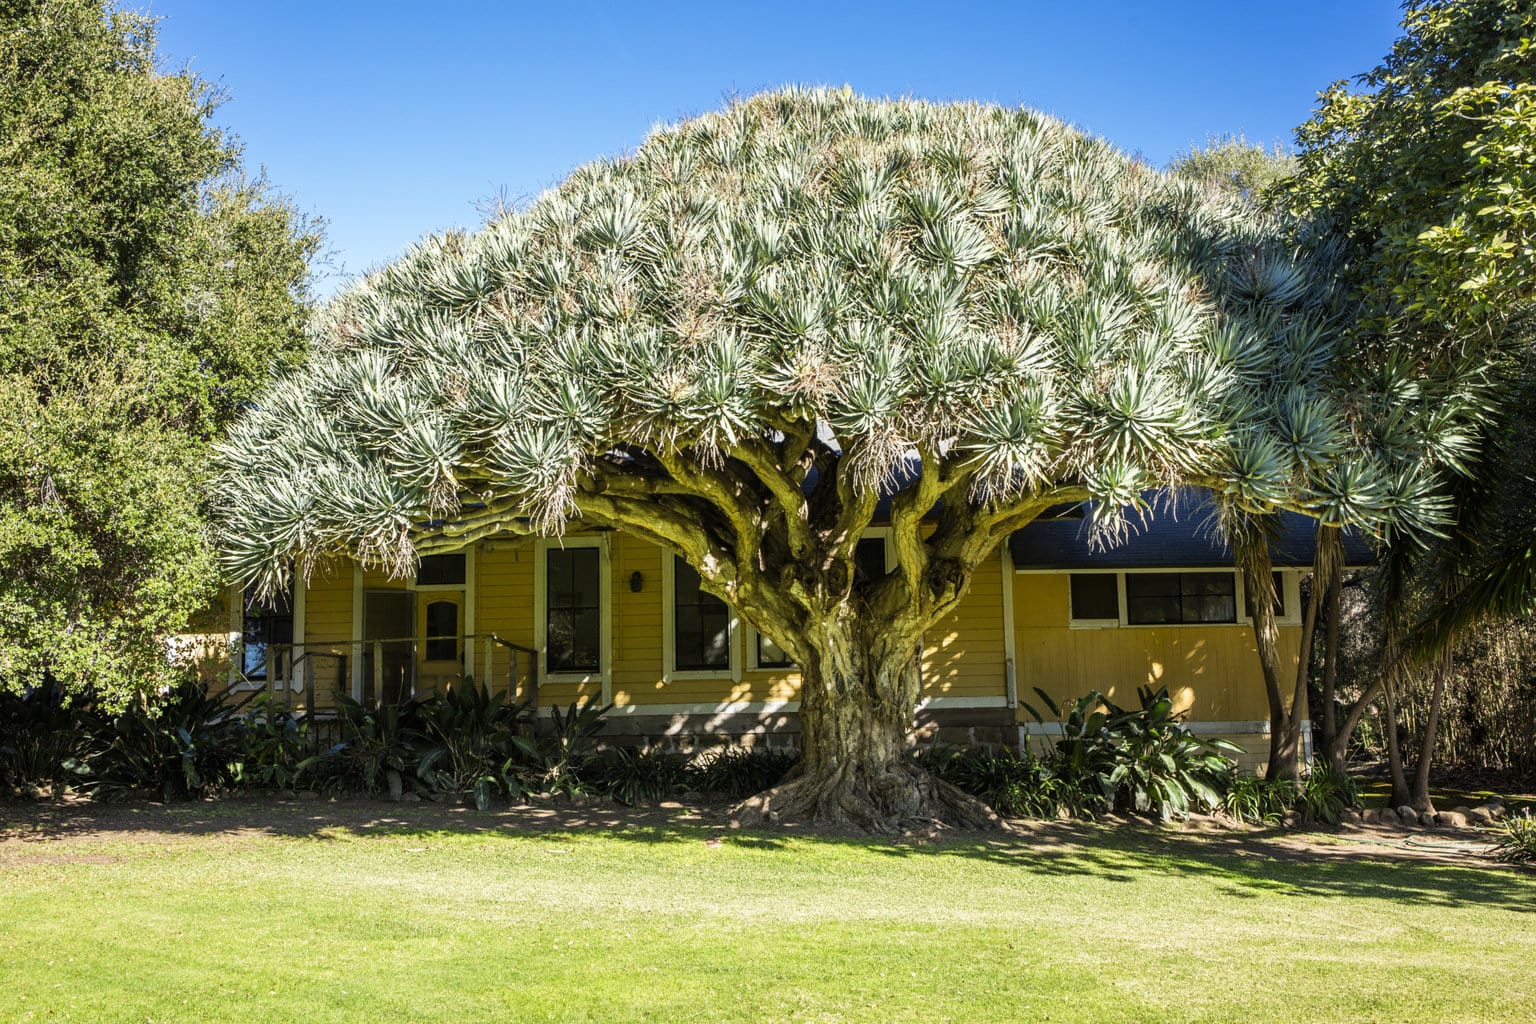 old-1900's-style-ranch-home-with-flowering-tree-in-front